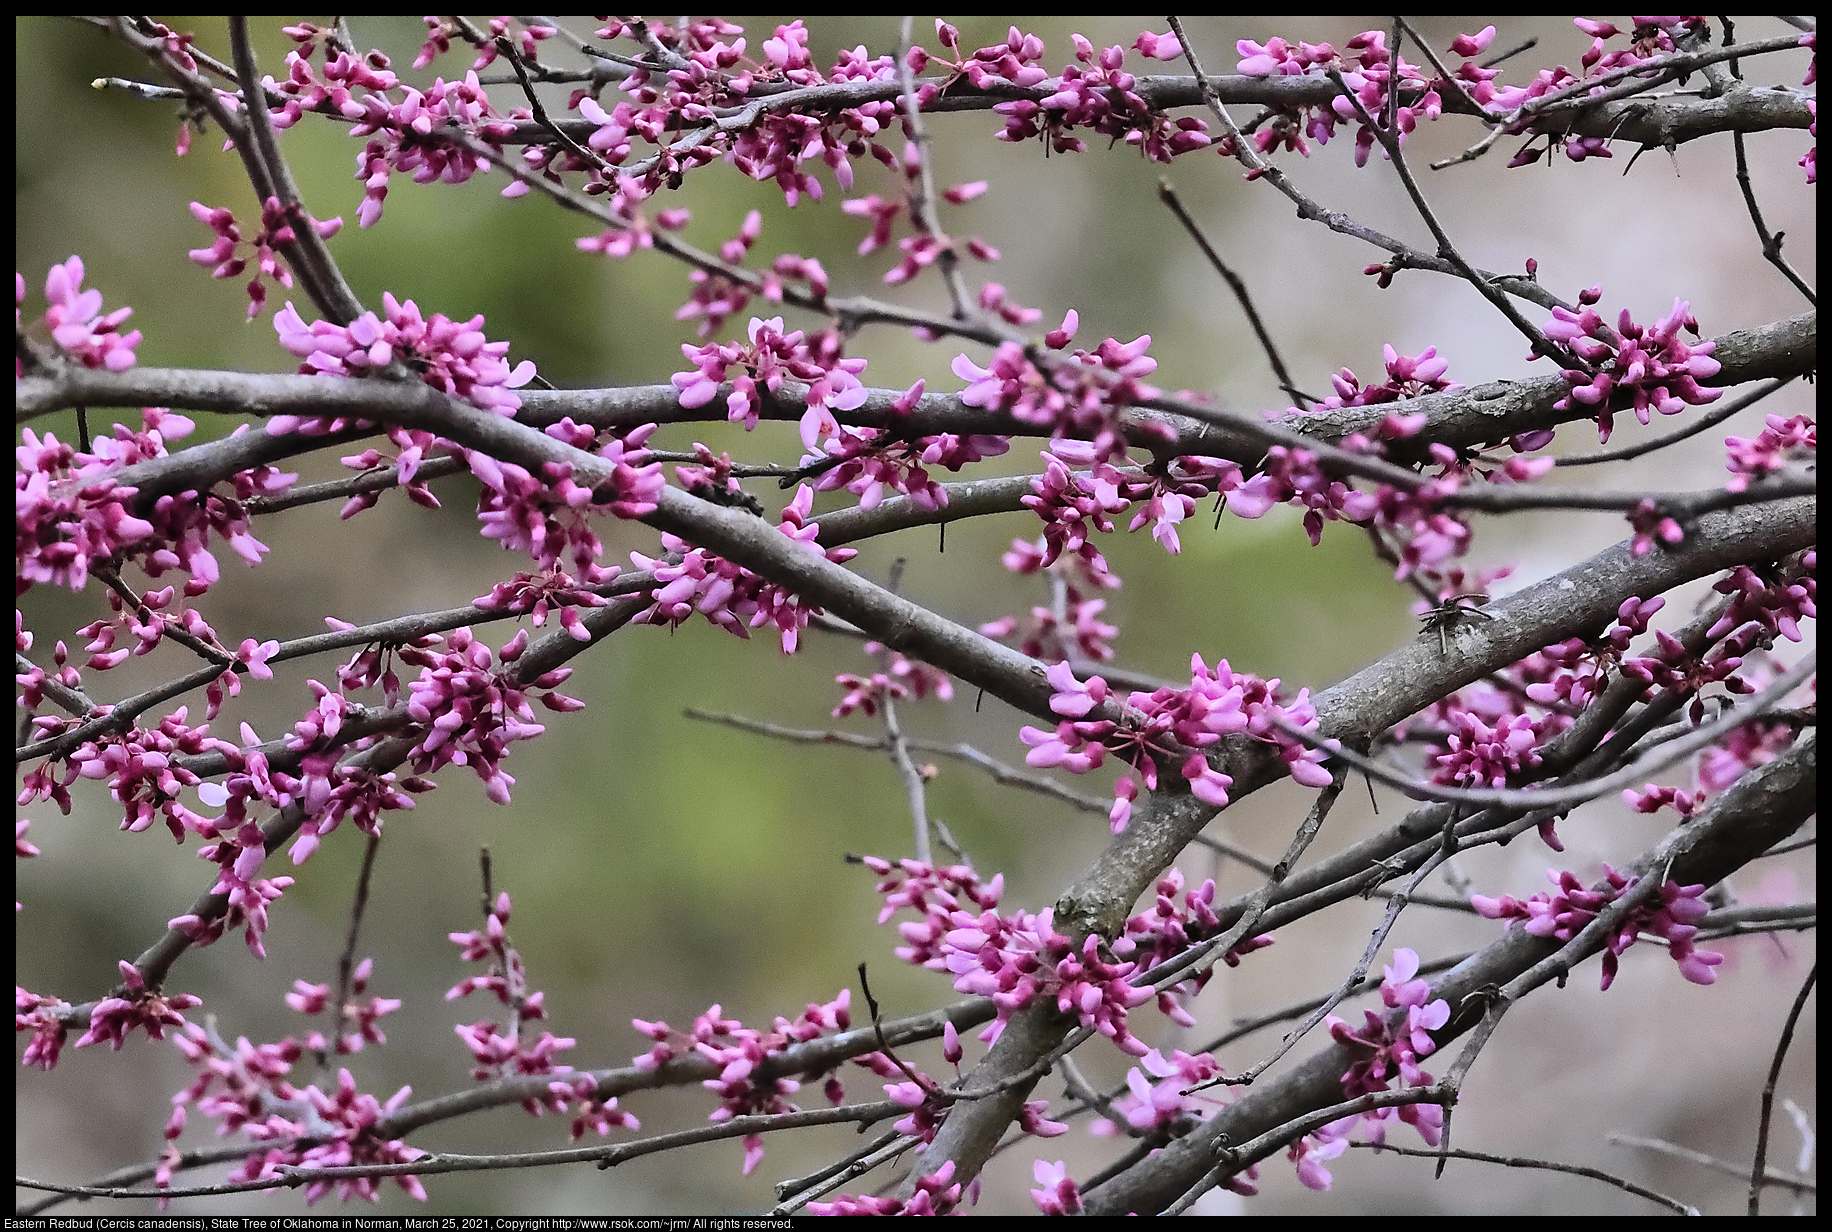 Eastern Redbud (Cercis canadensis), State Tree of Oklahoma in Norman, March 25, 2021